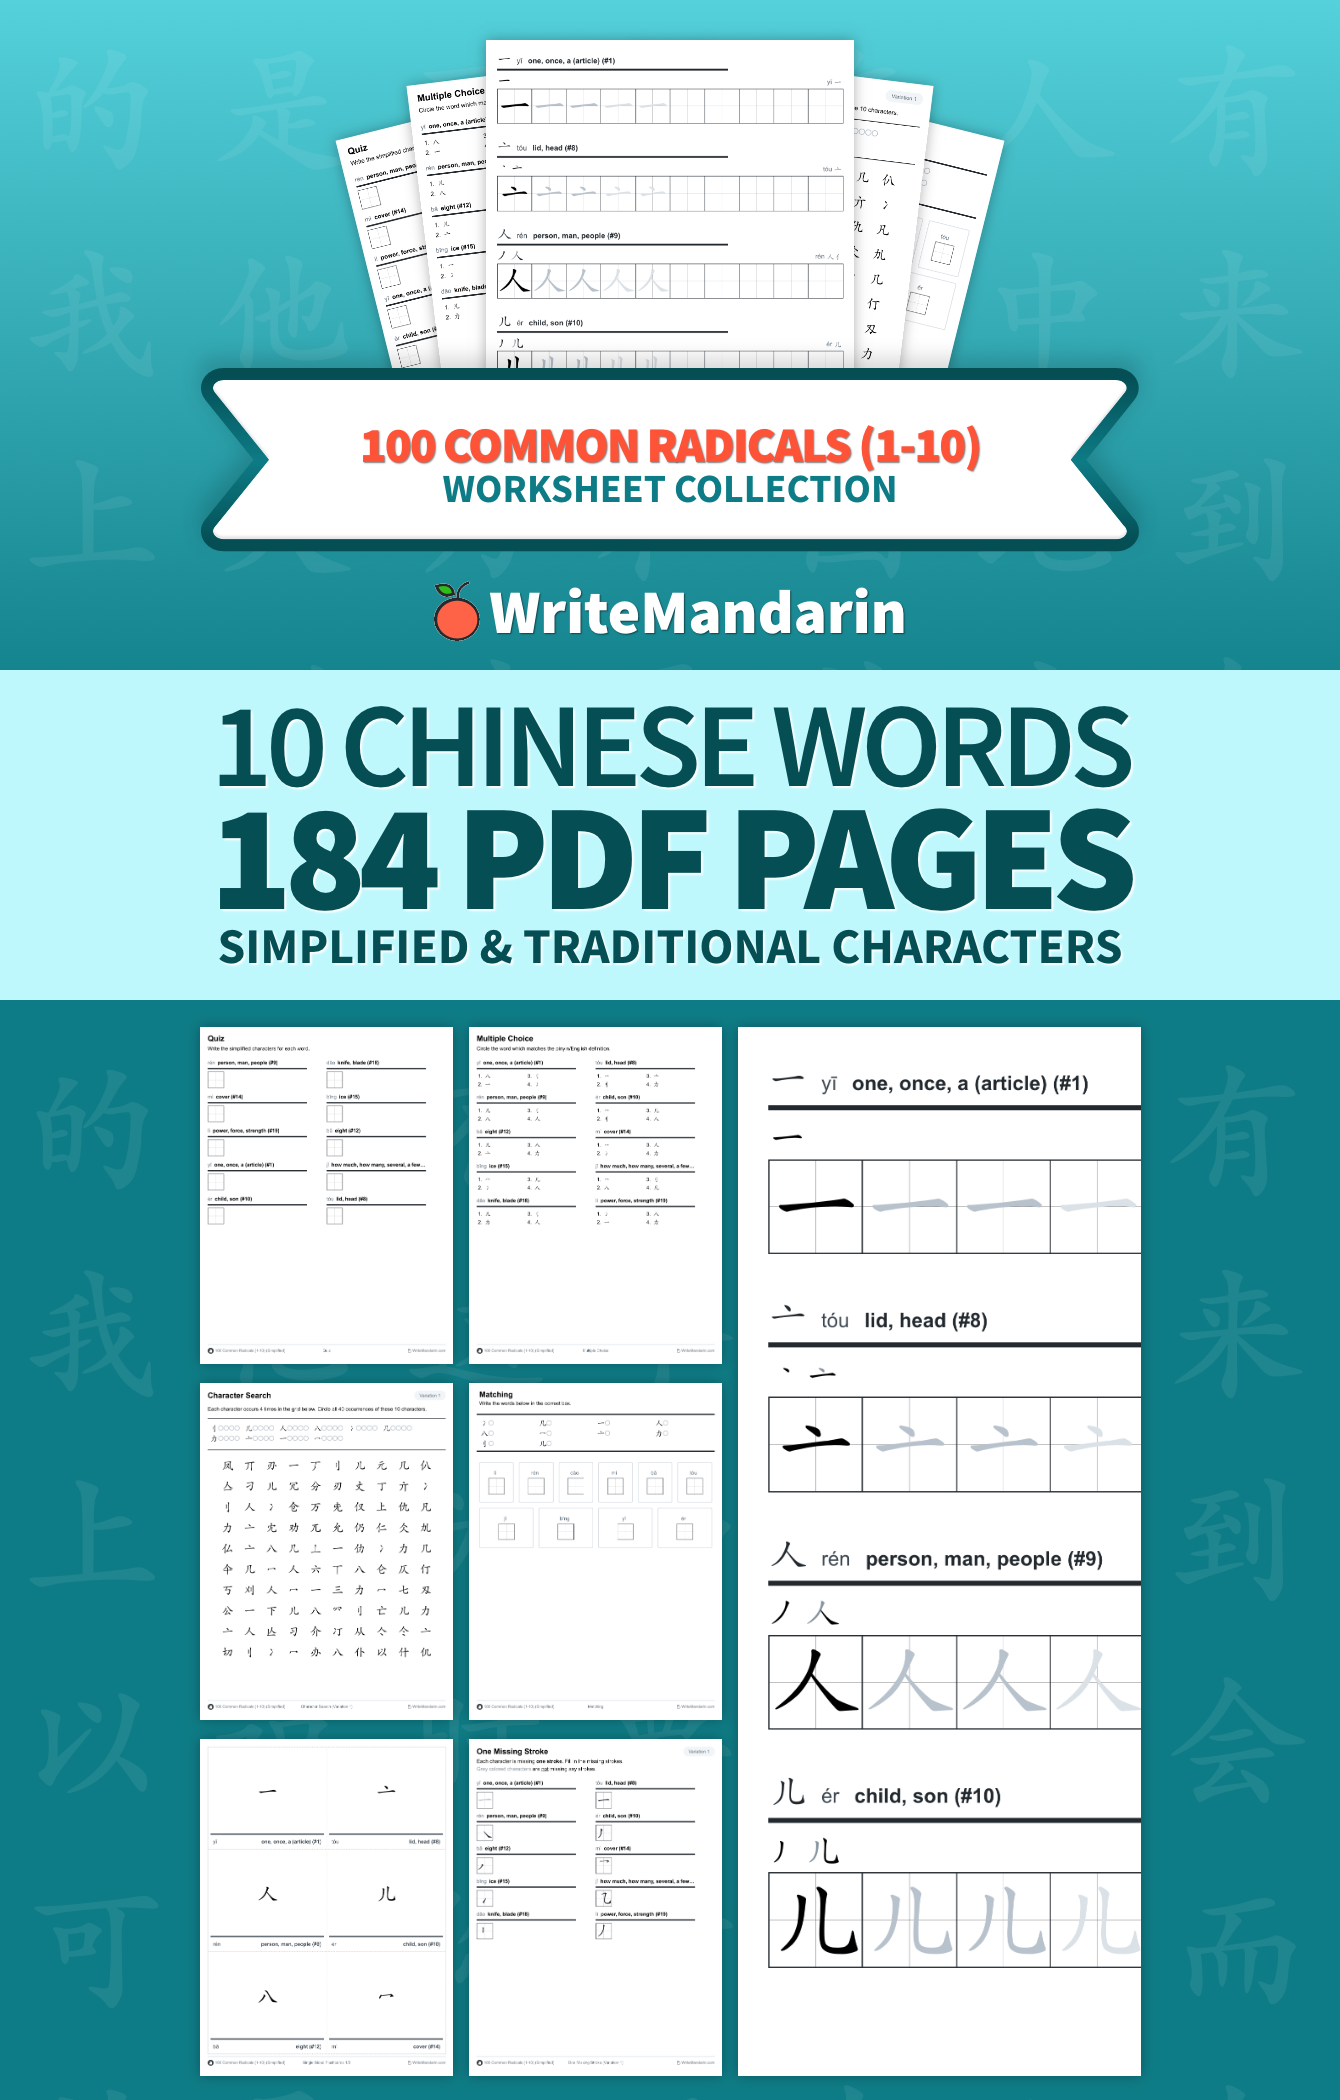 Preview image of 100 Common Radicals (1-10) worksheet collection